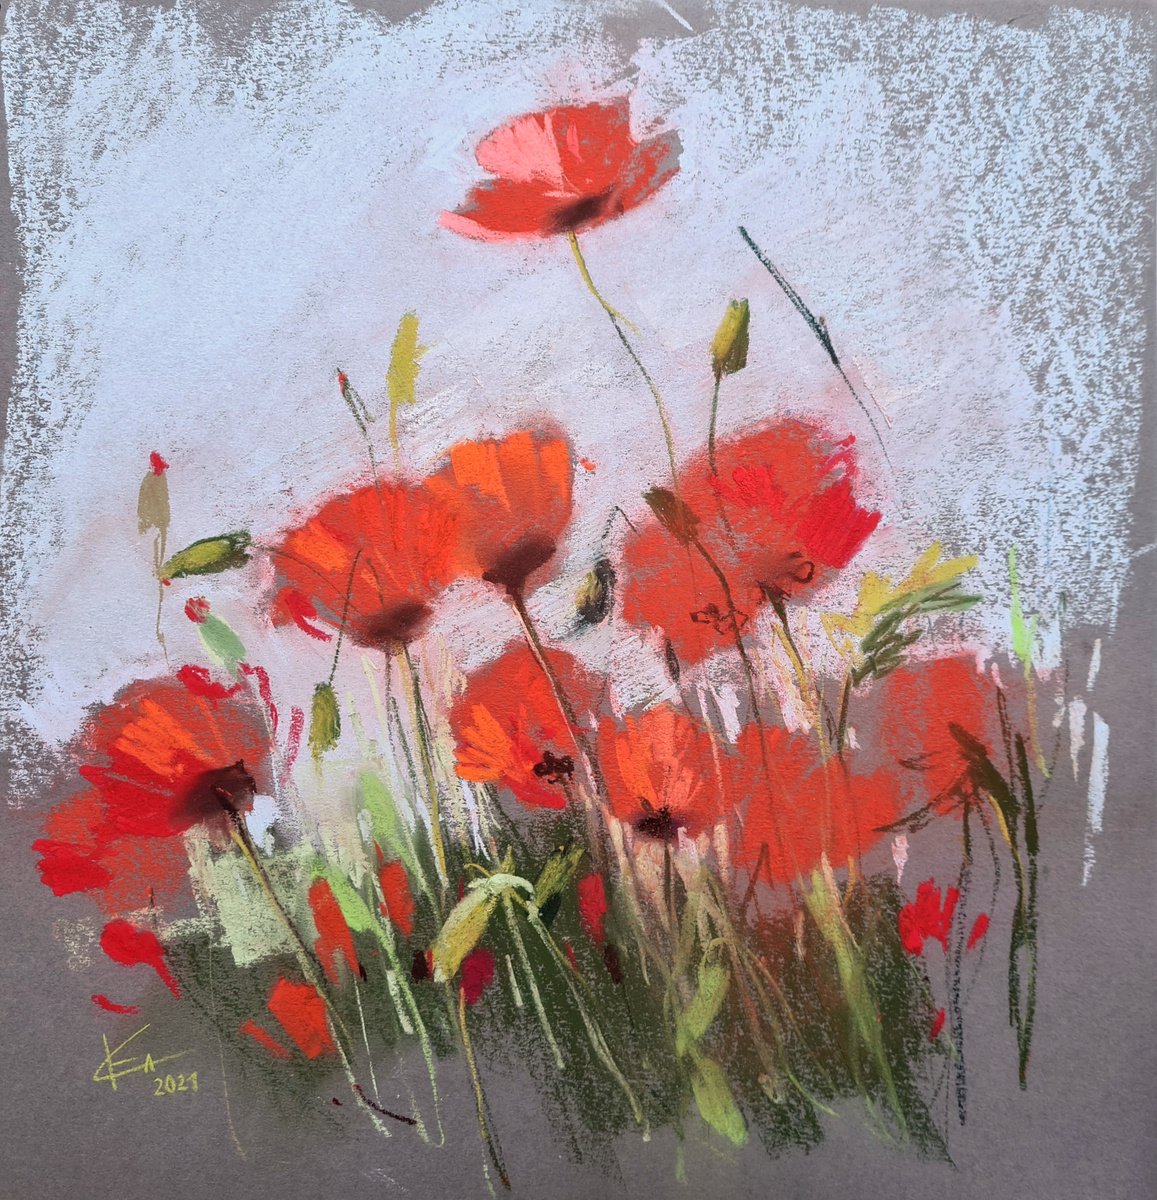 Poppies. Sketch by Ekaterina Solod